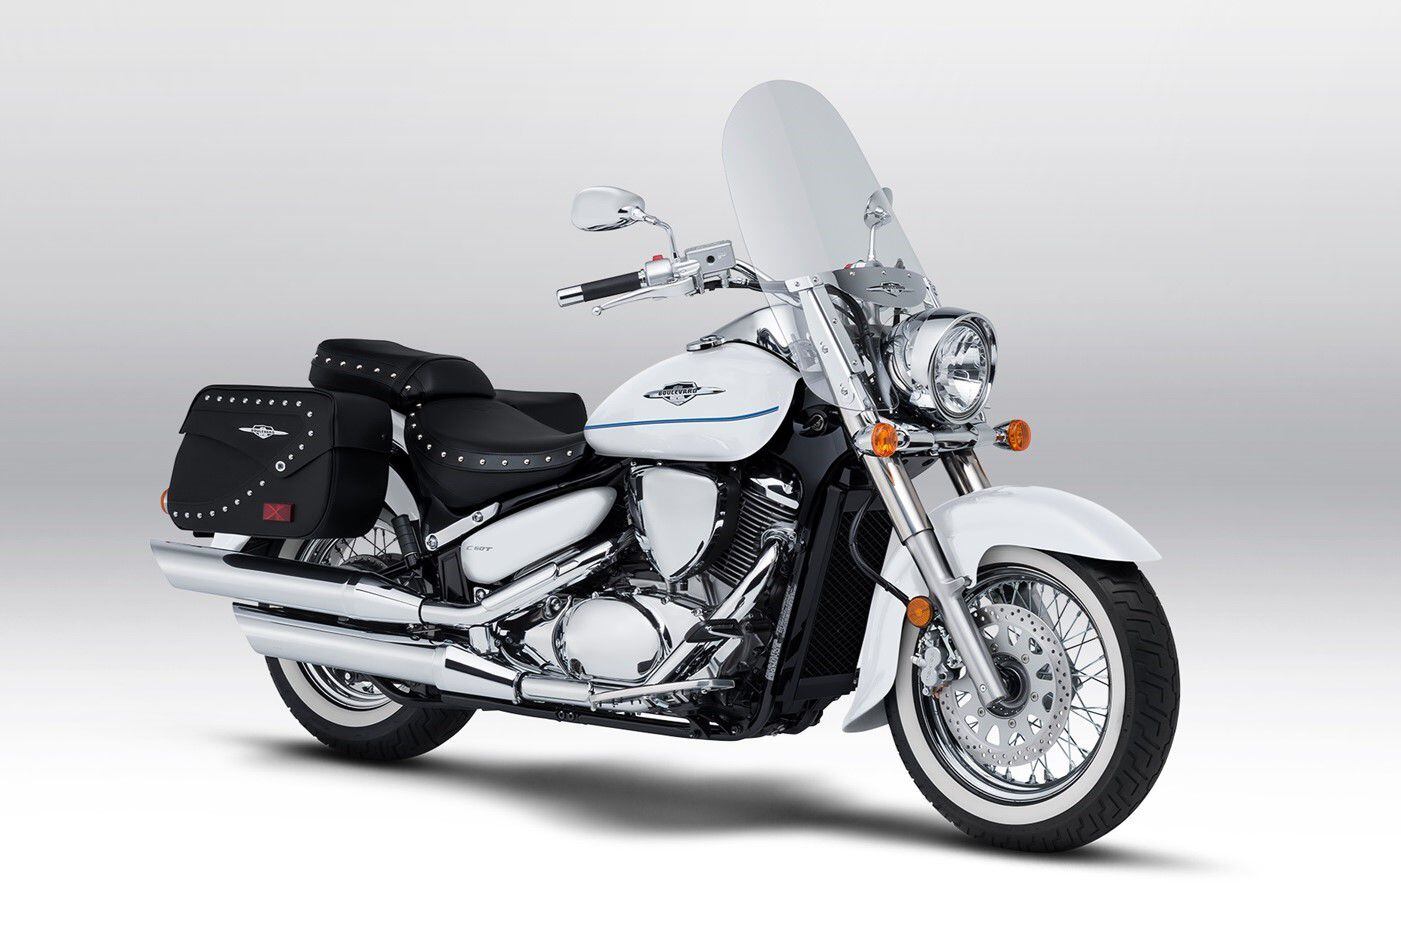 Looking at longer trips? The more touring-friendly C50T variant ($10,359) is still on Suzuki’s website, but as a 2023 model.